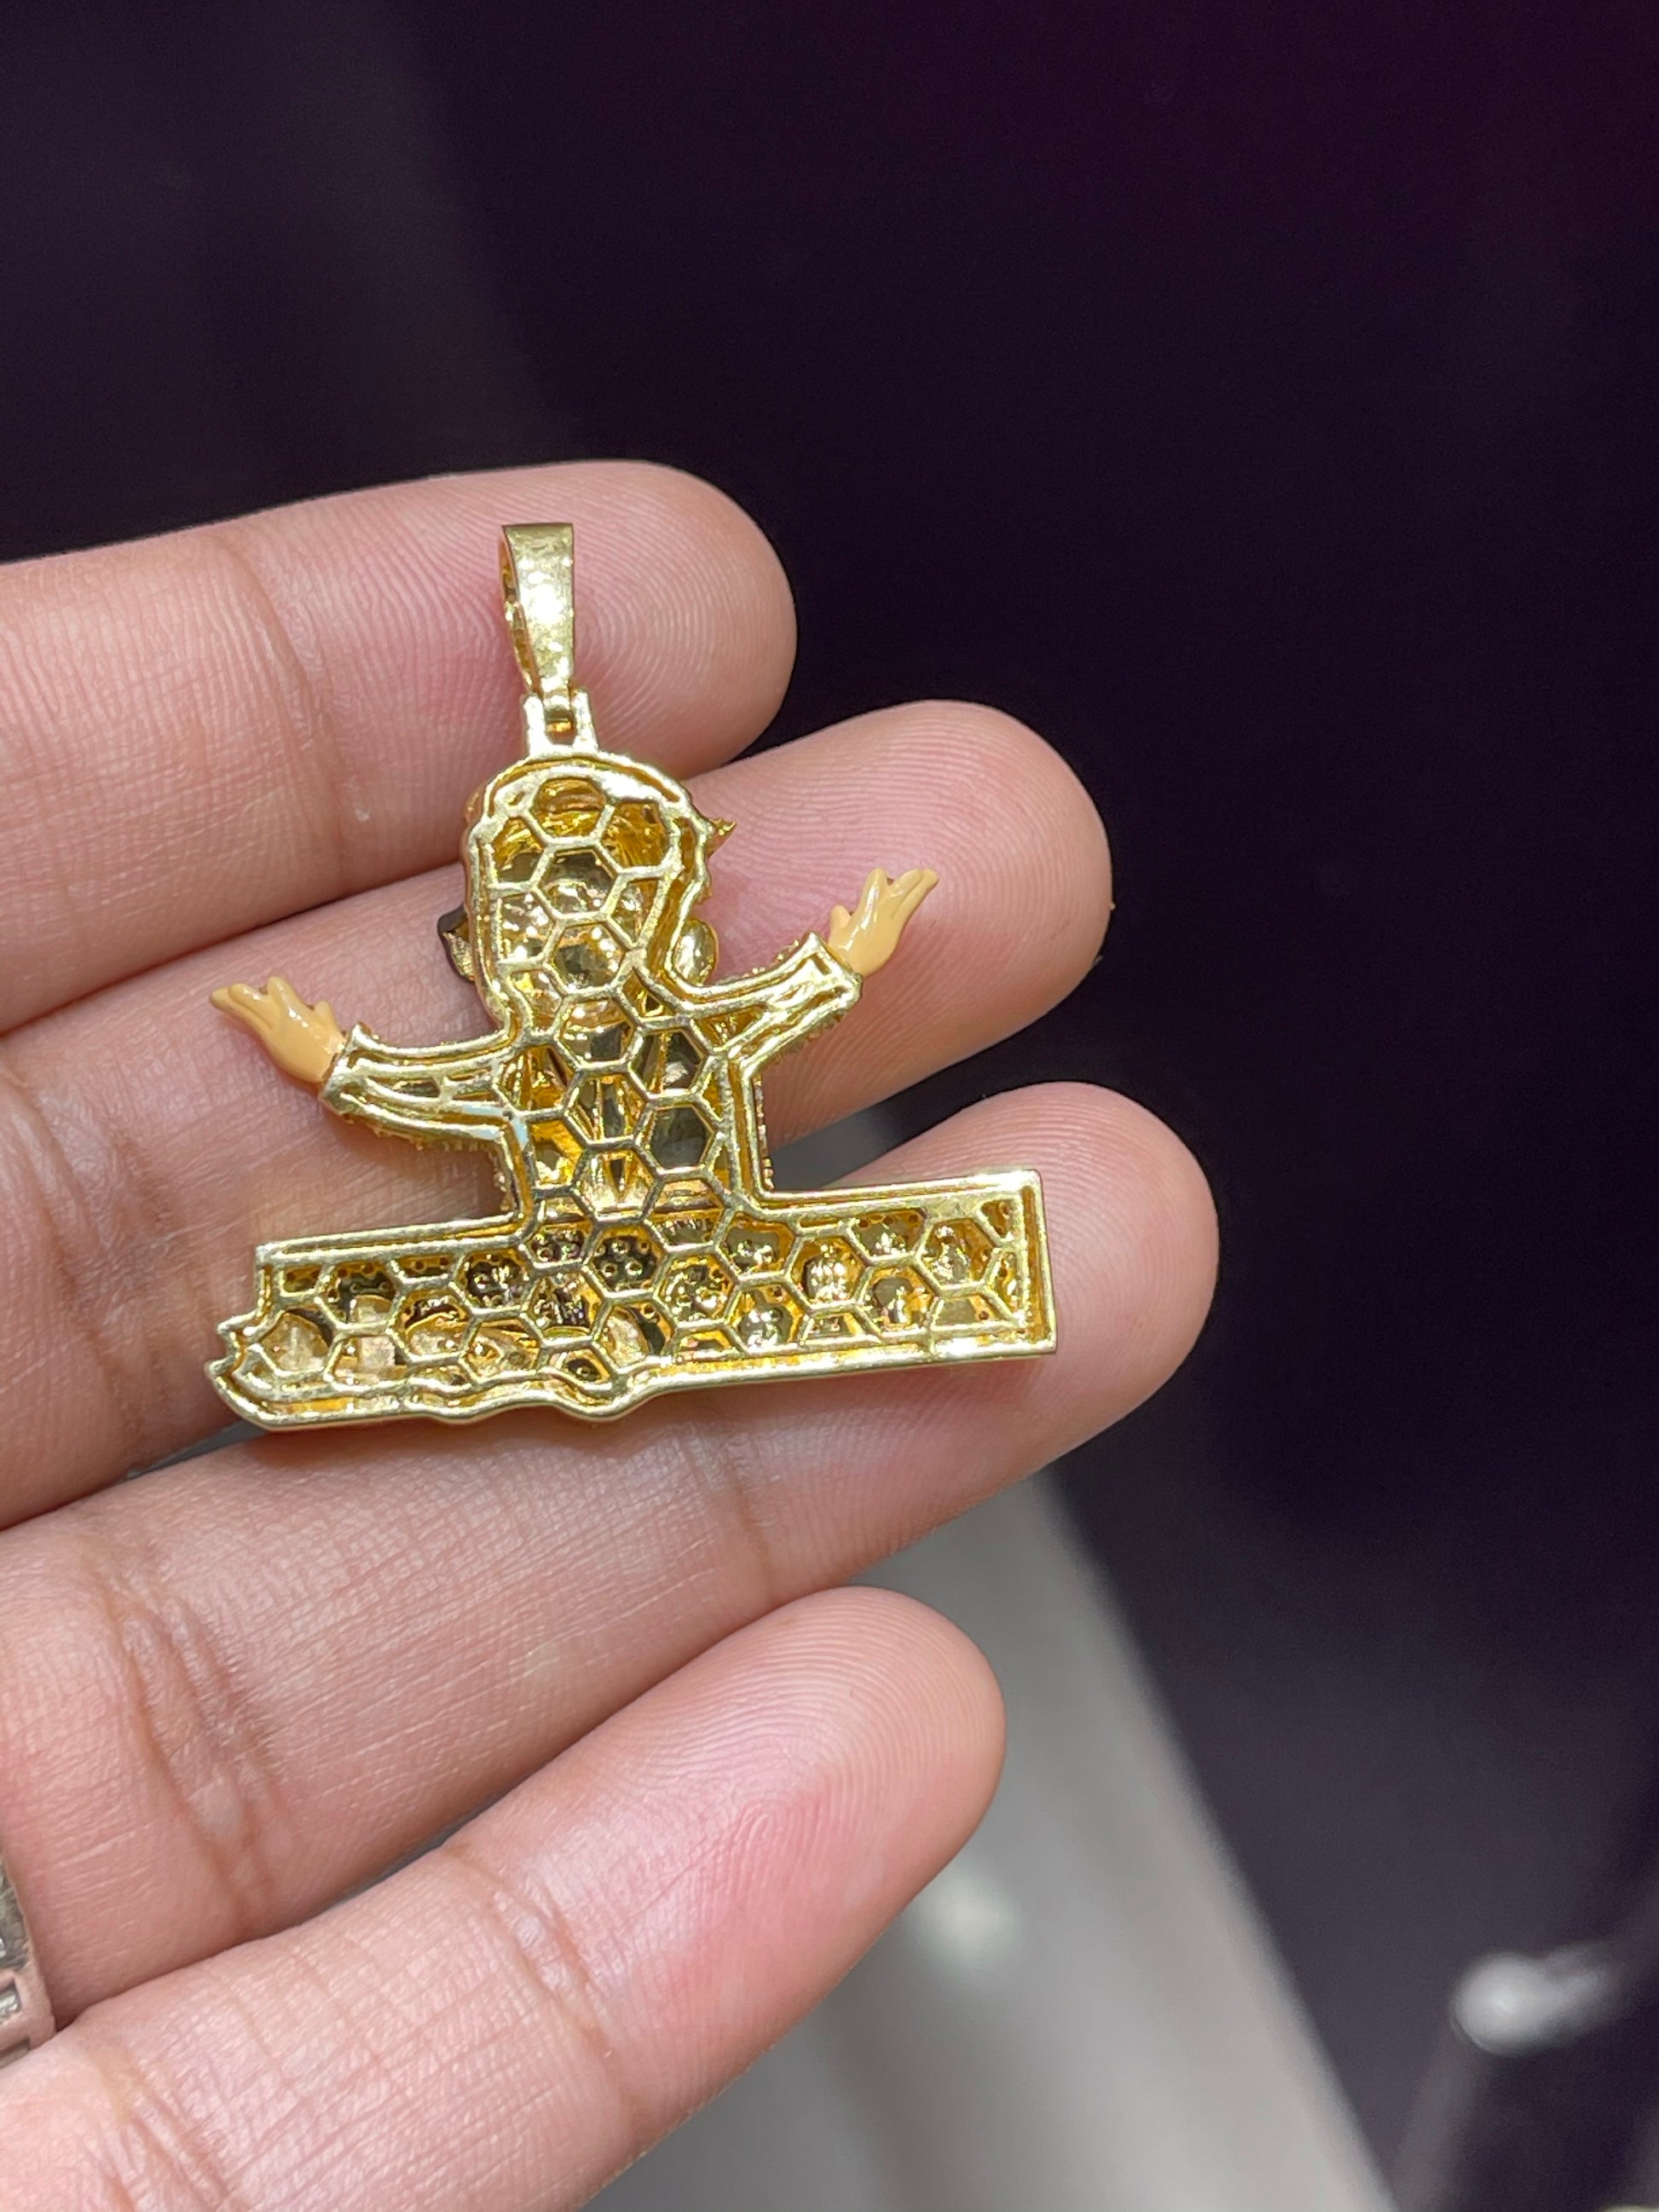 10k yellow Gold Wallstreet Bets pendant with 1ctw